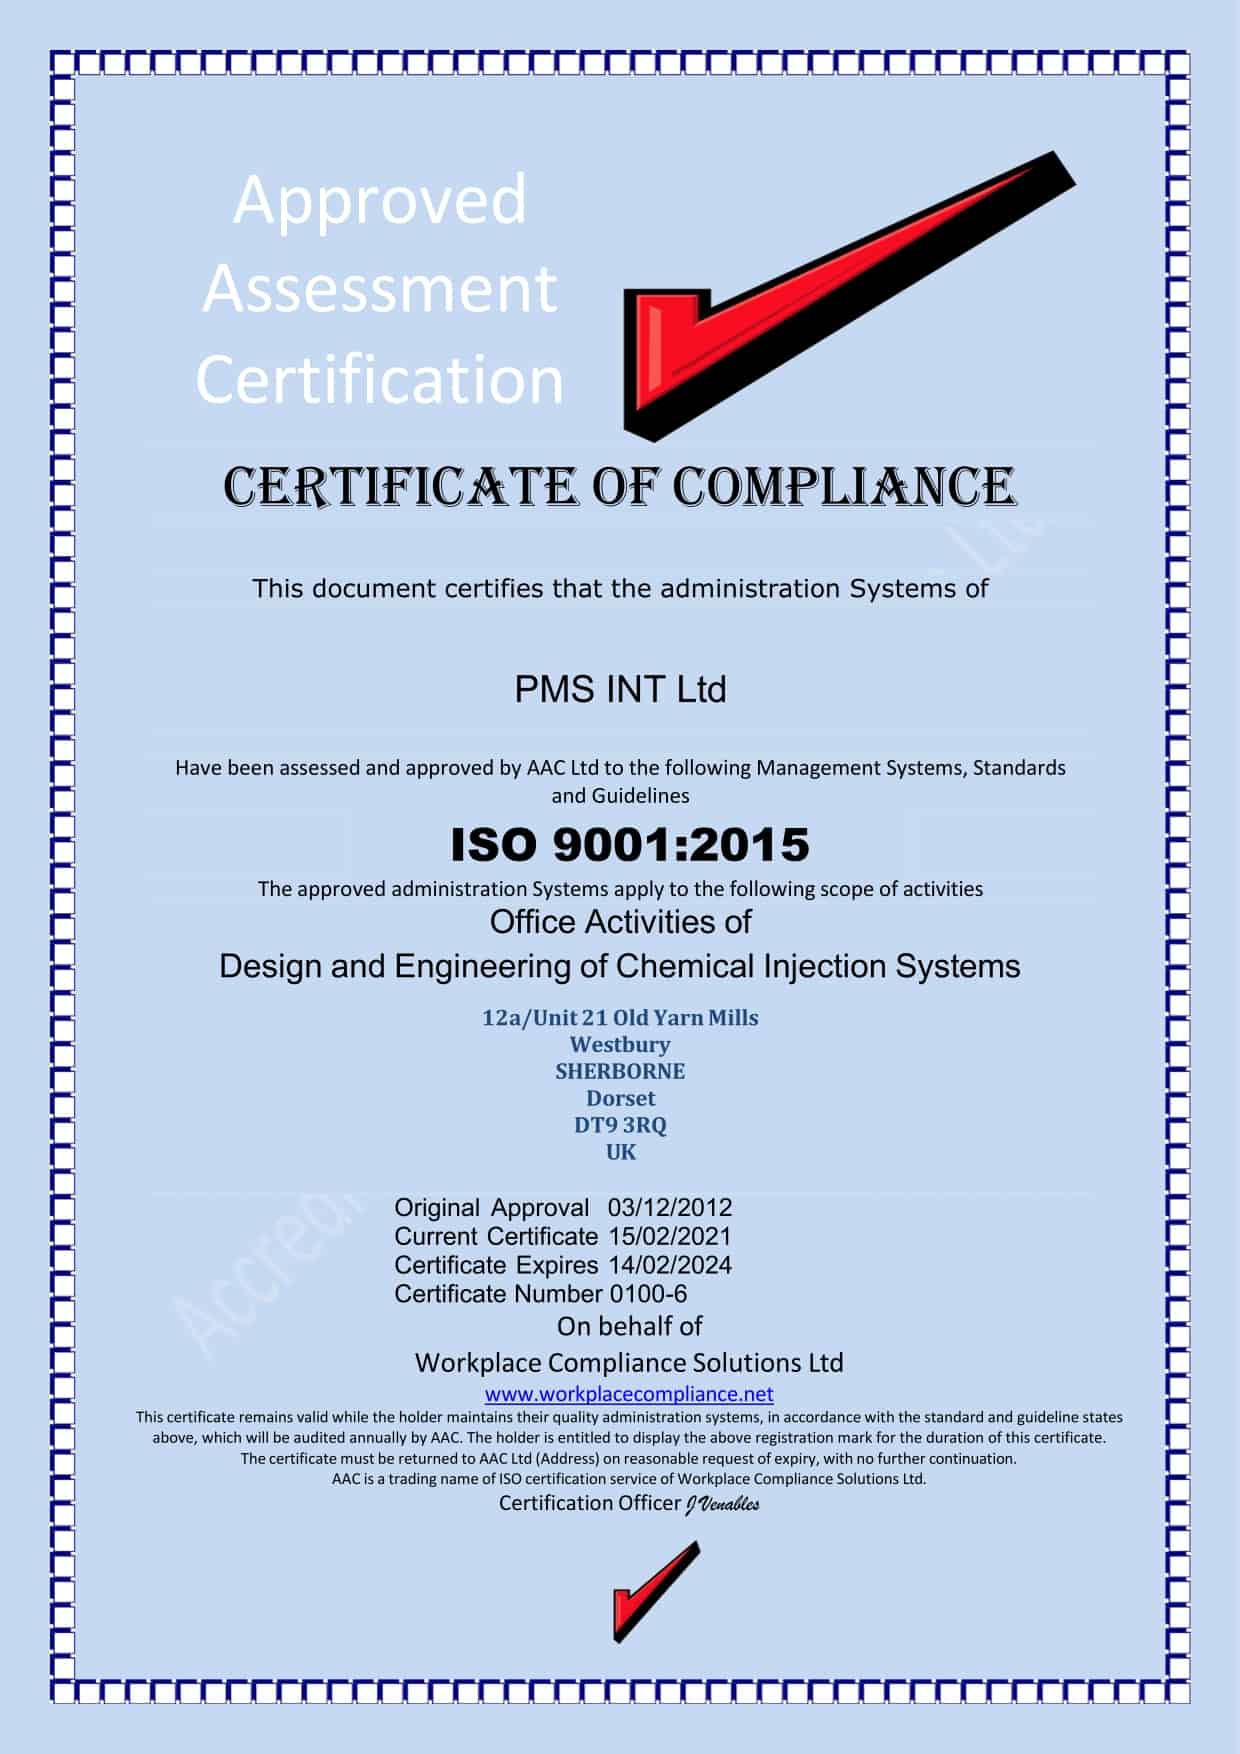 ISO Certificate Of Compliance